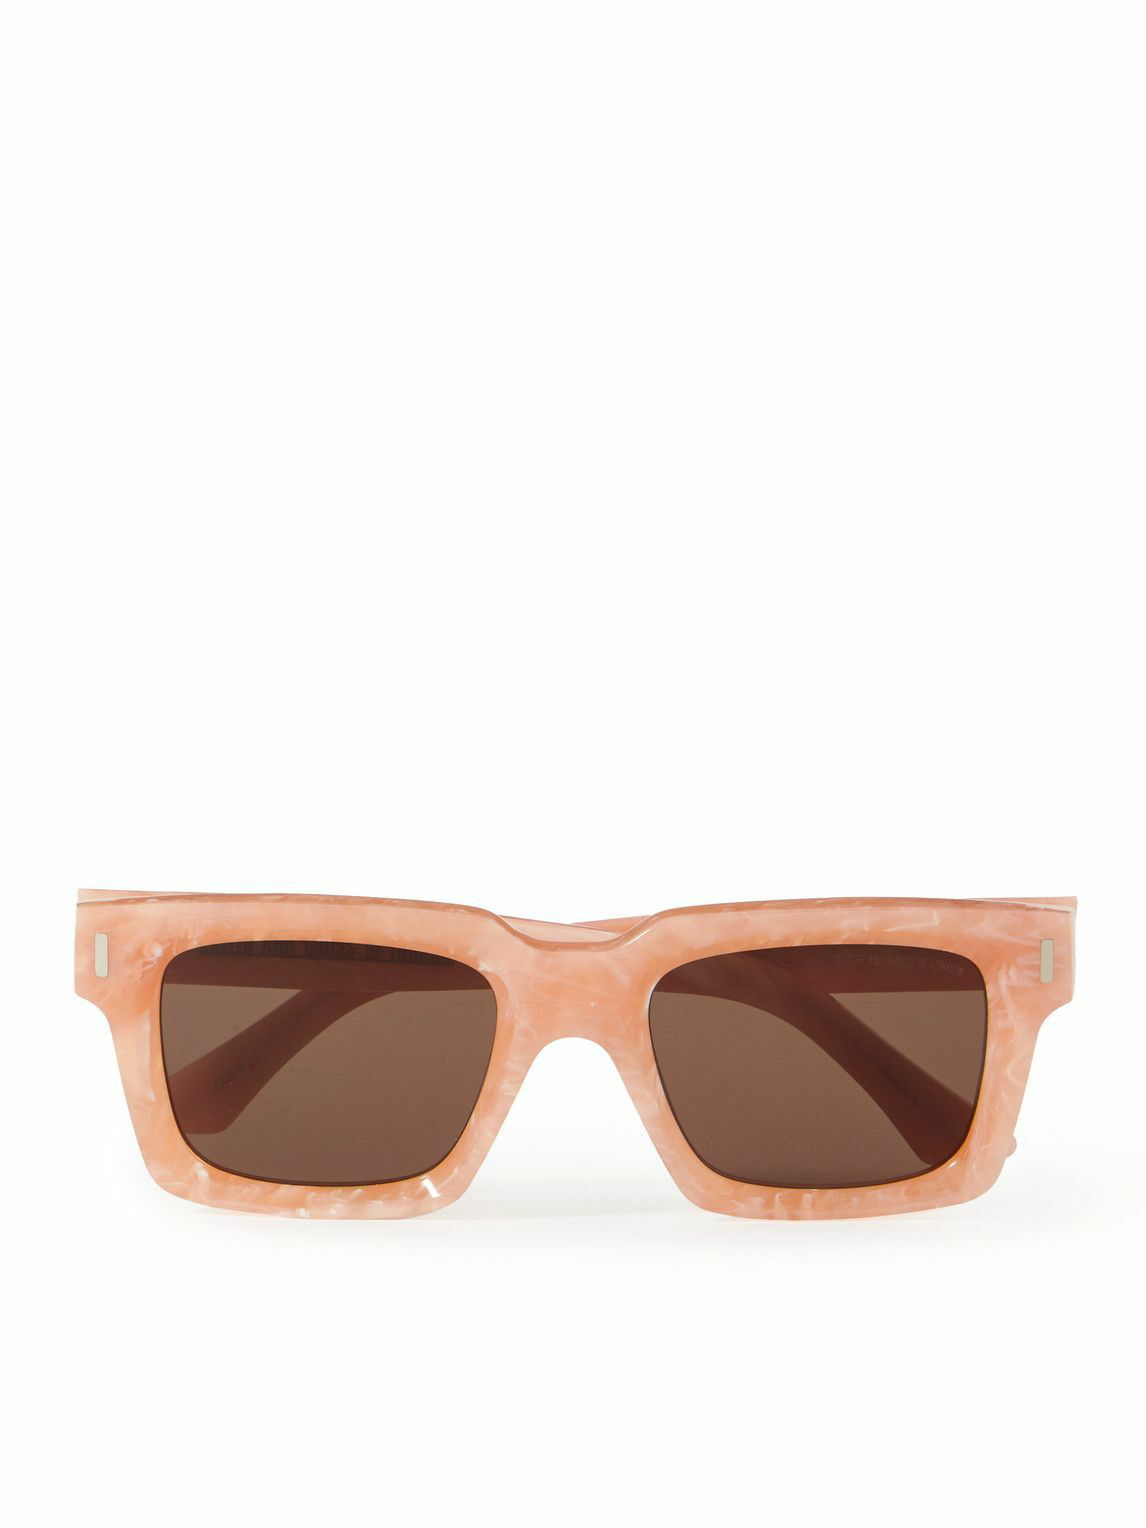 Cutler and Gross - 1386 Square-Frame Acetate Sunglasses Cutler and Gross